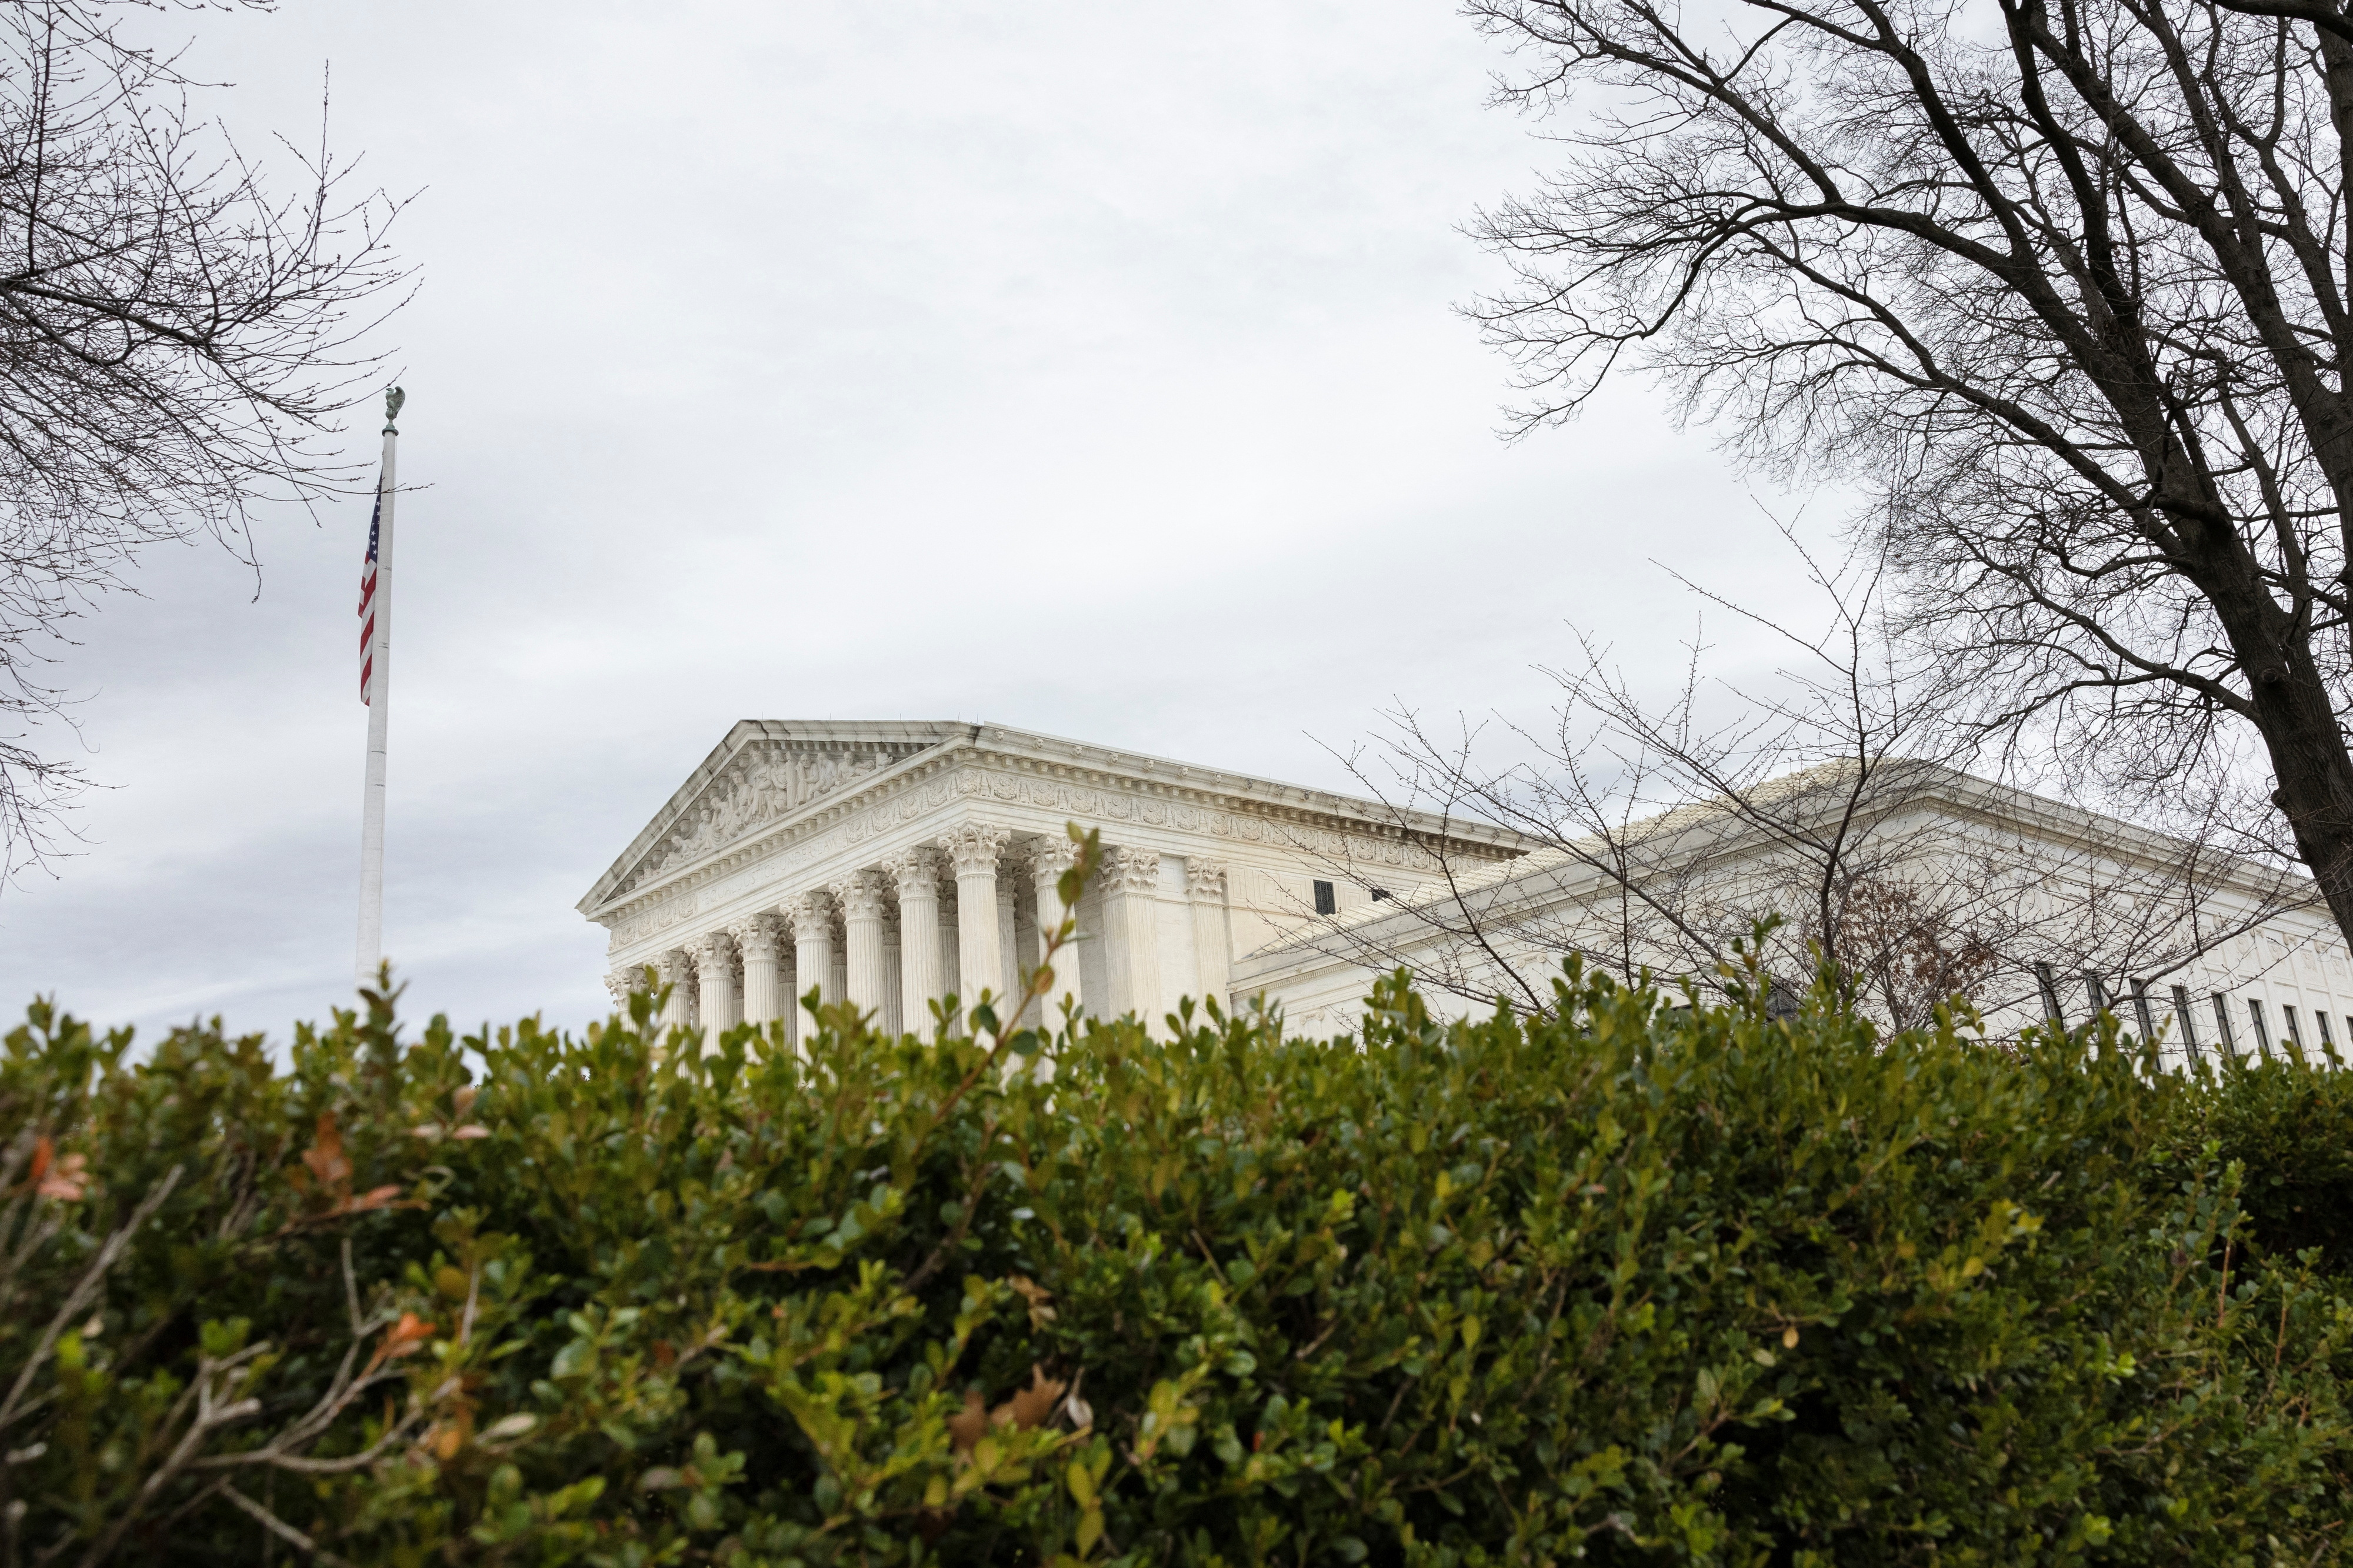 Supreme Court Justices hear oral arguments on Twitter court apeal in Washington